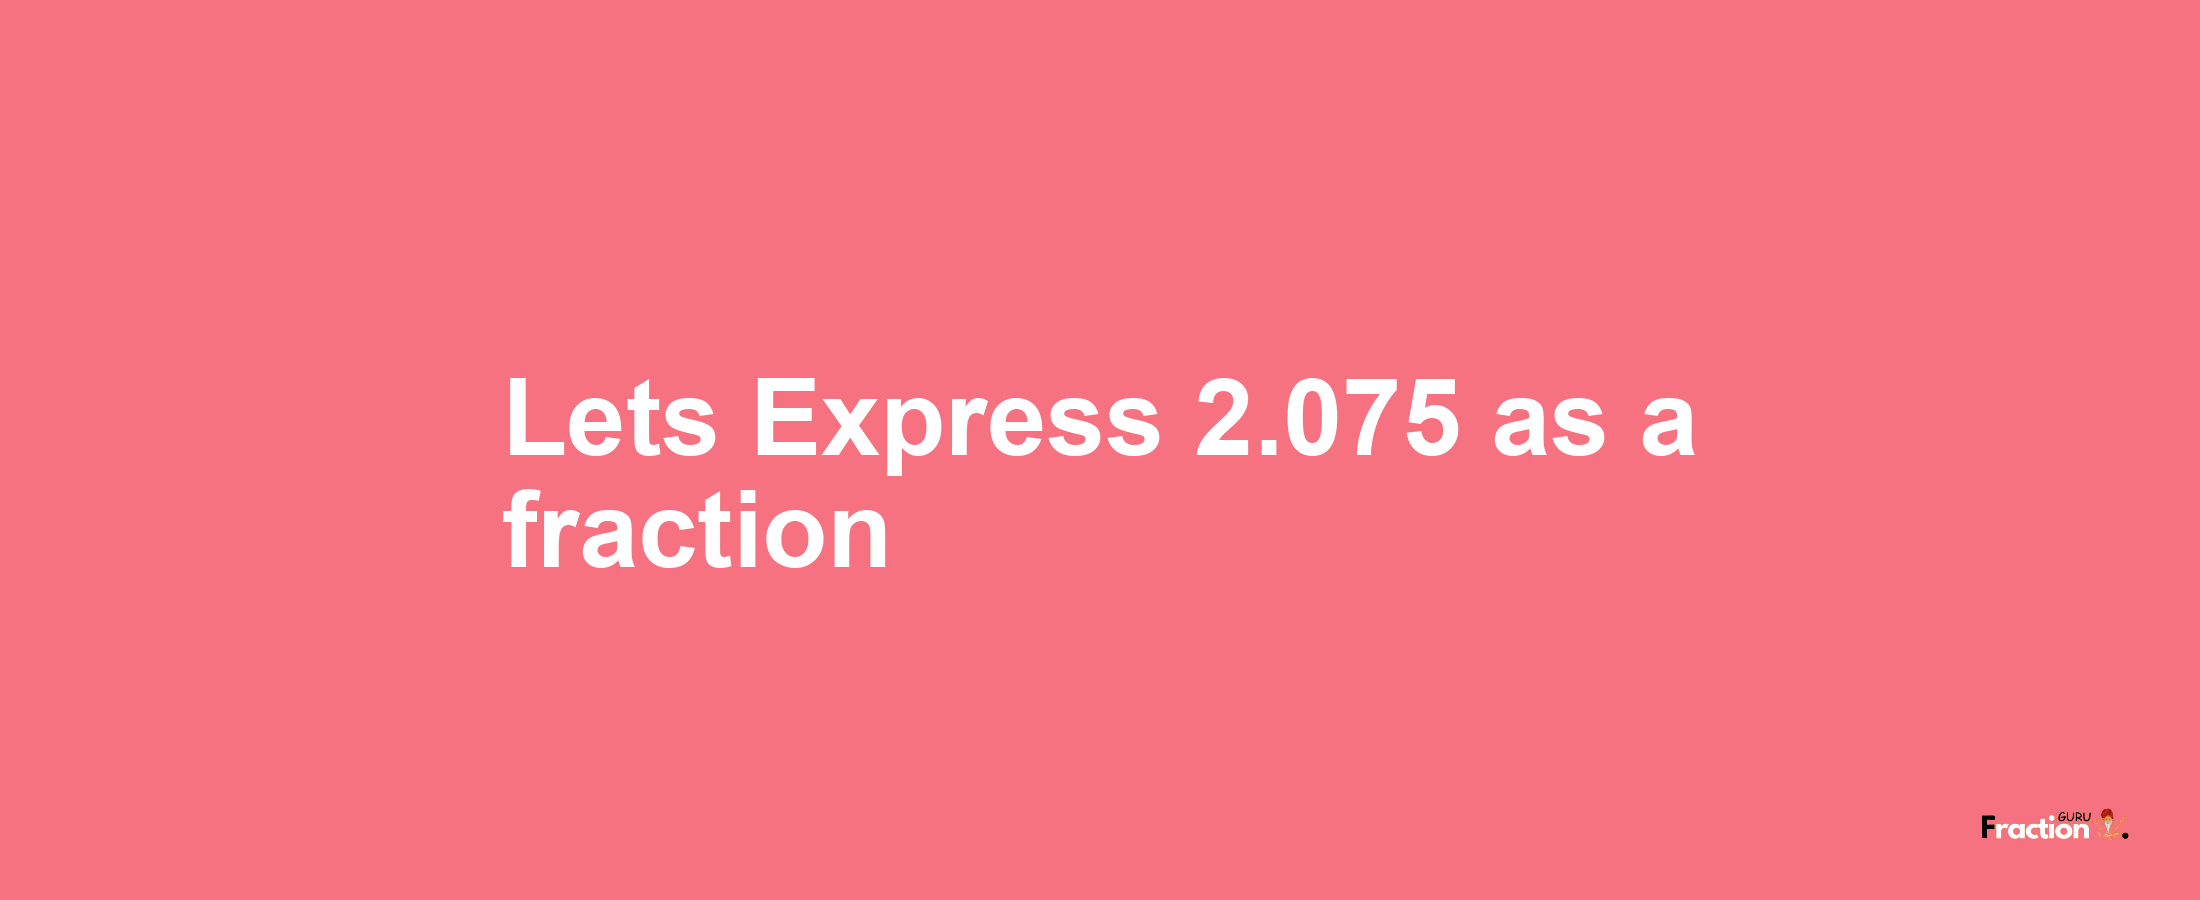 Lets Express 2.075 as afraction